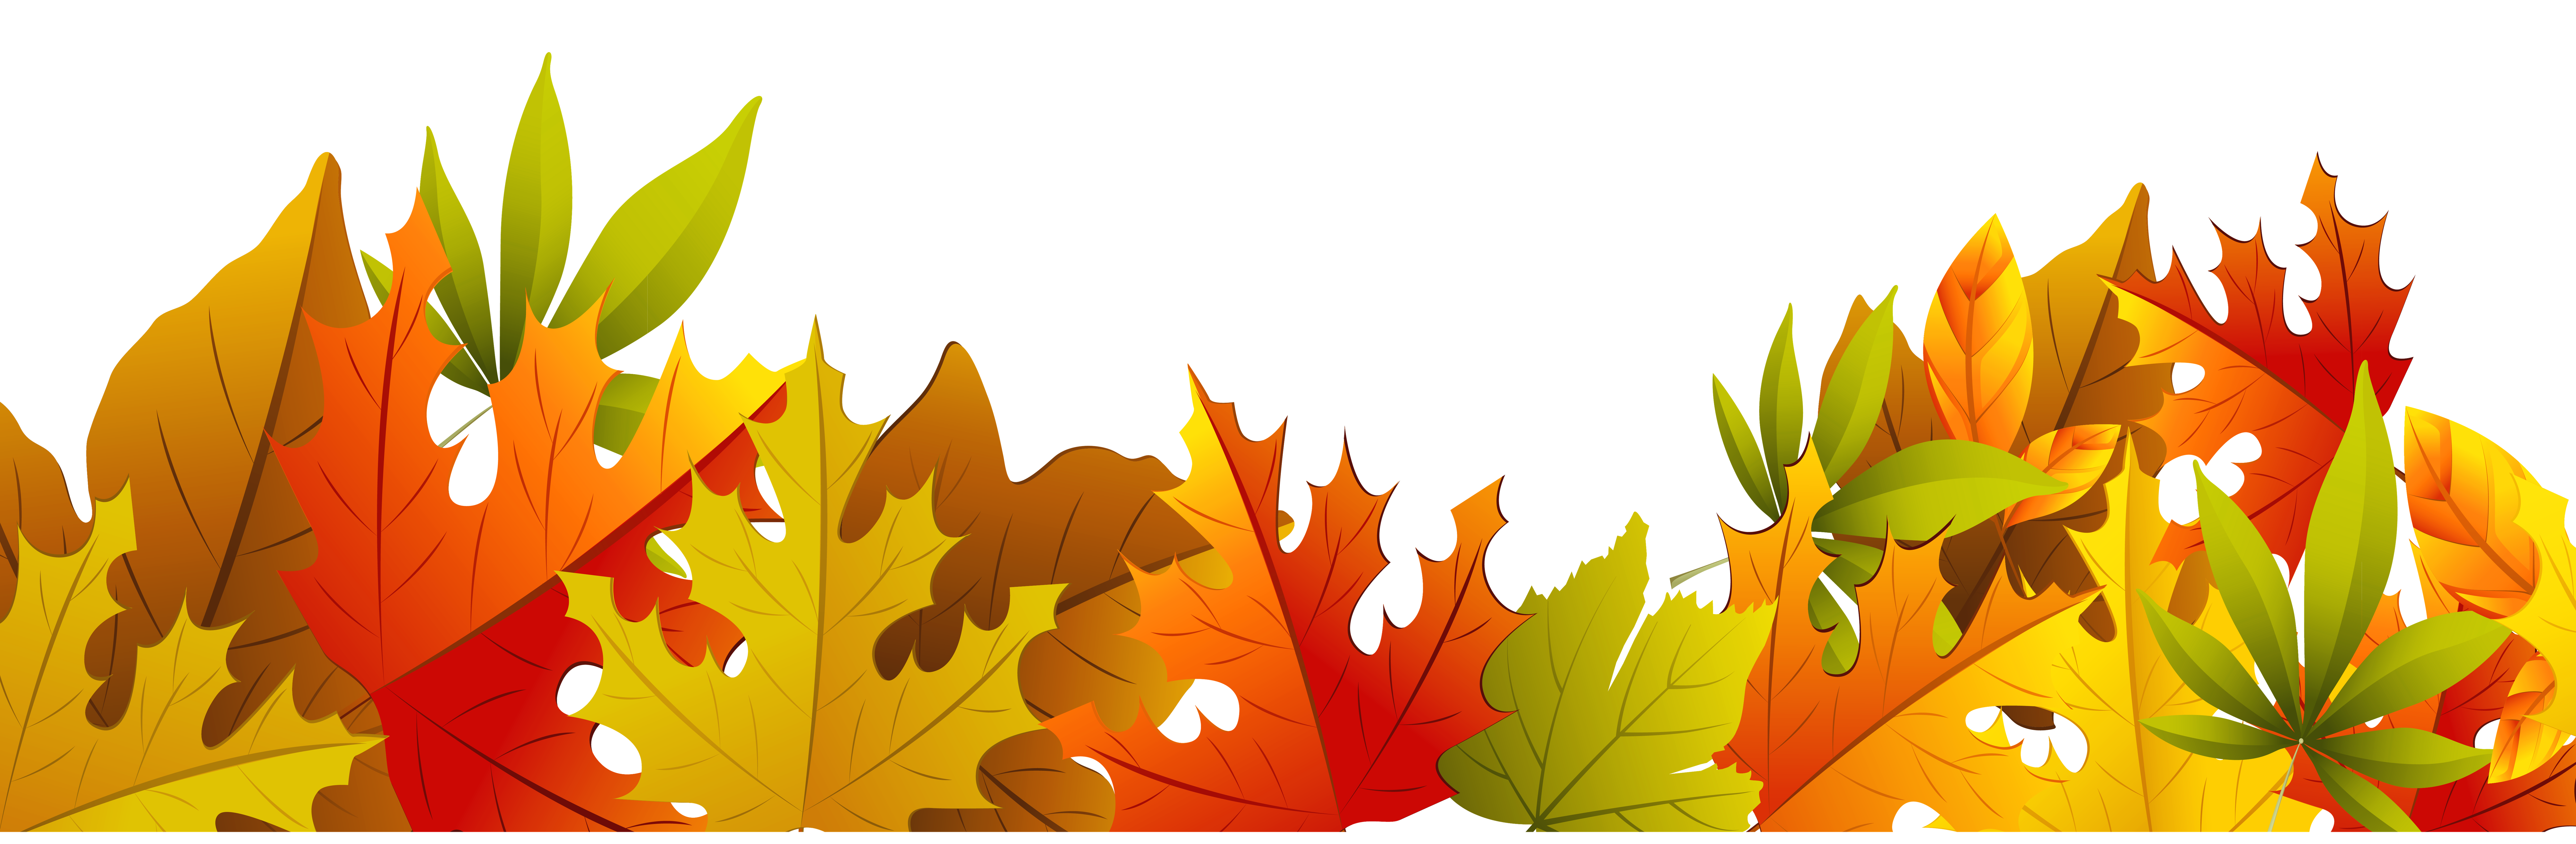 fall decorations clipart - photo #20